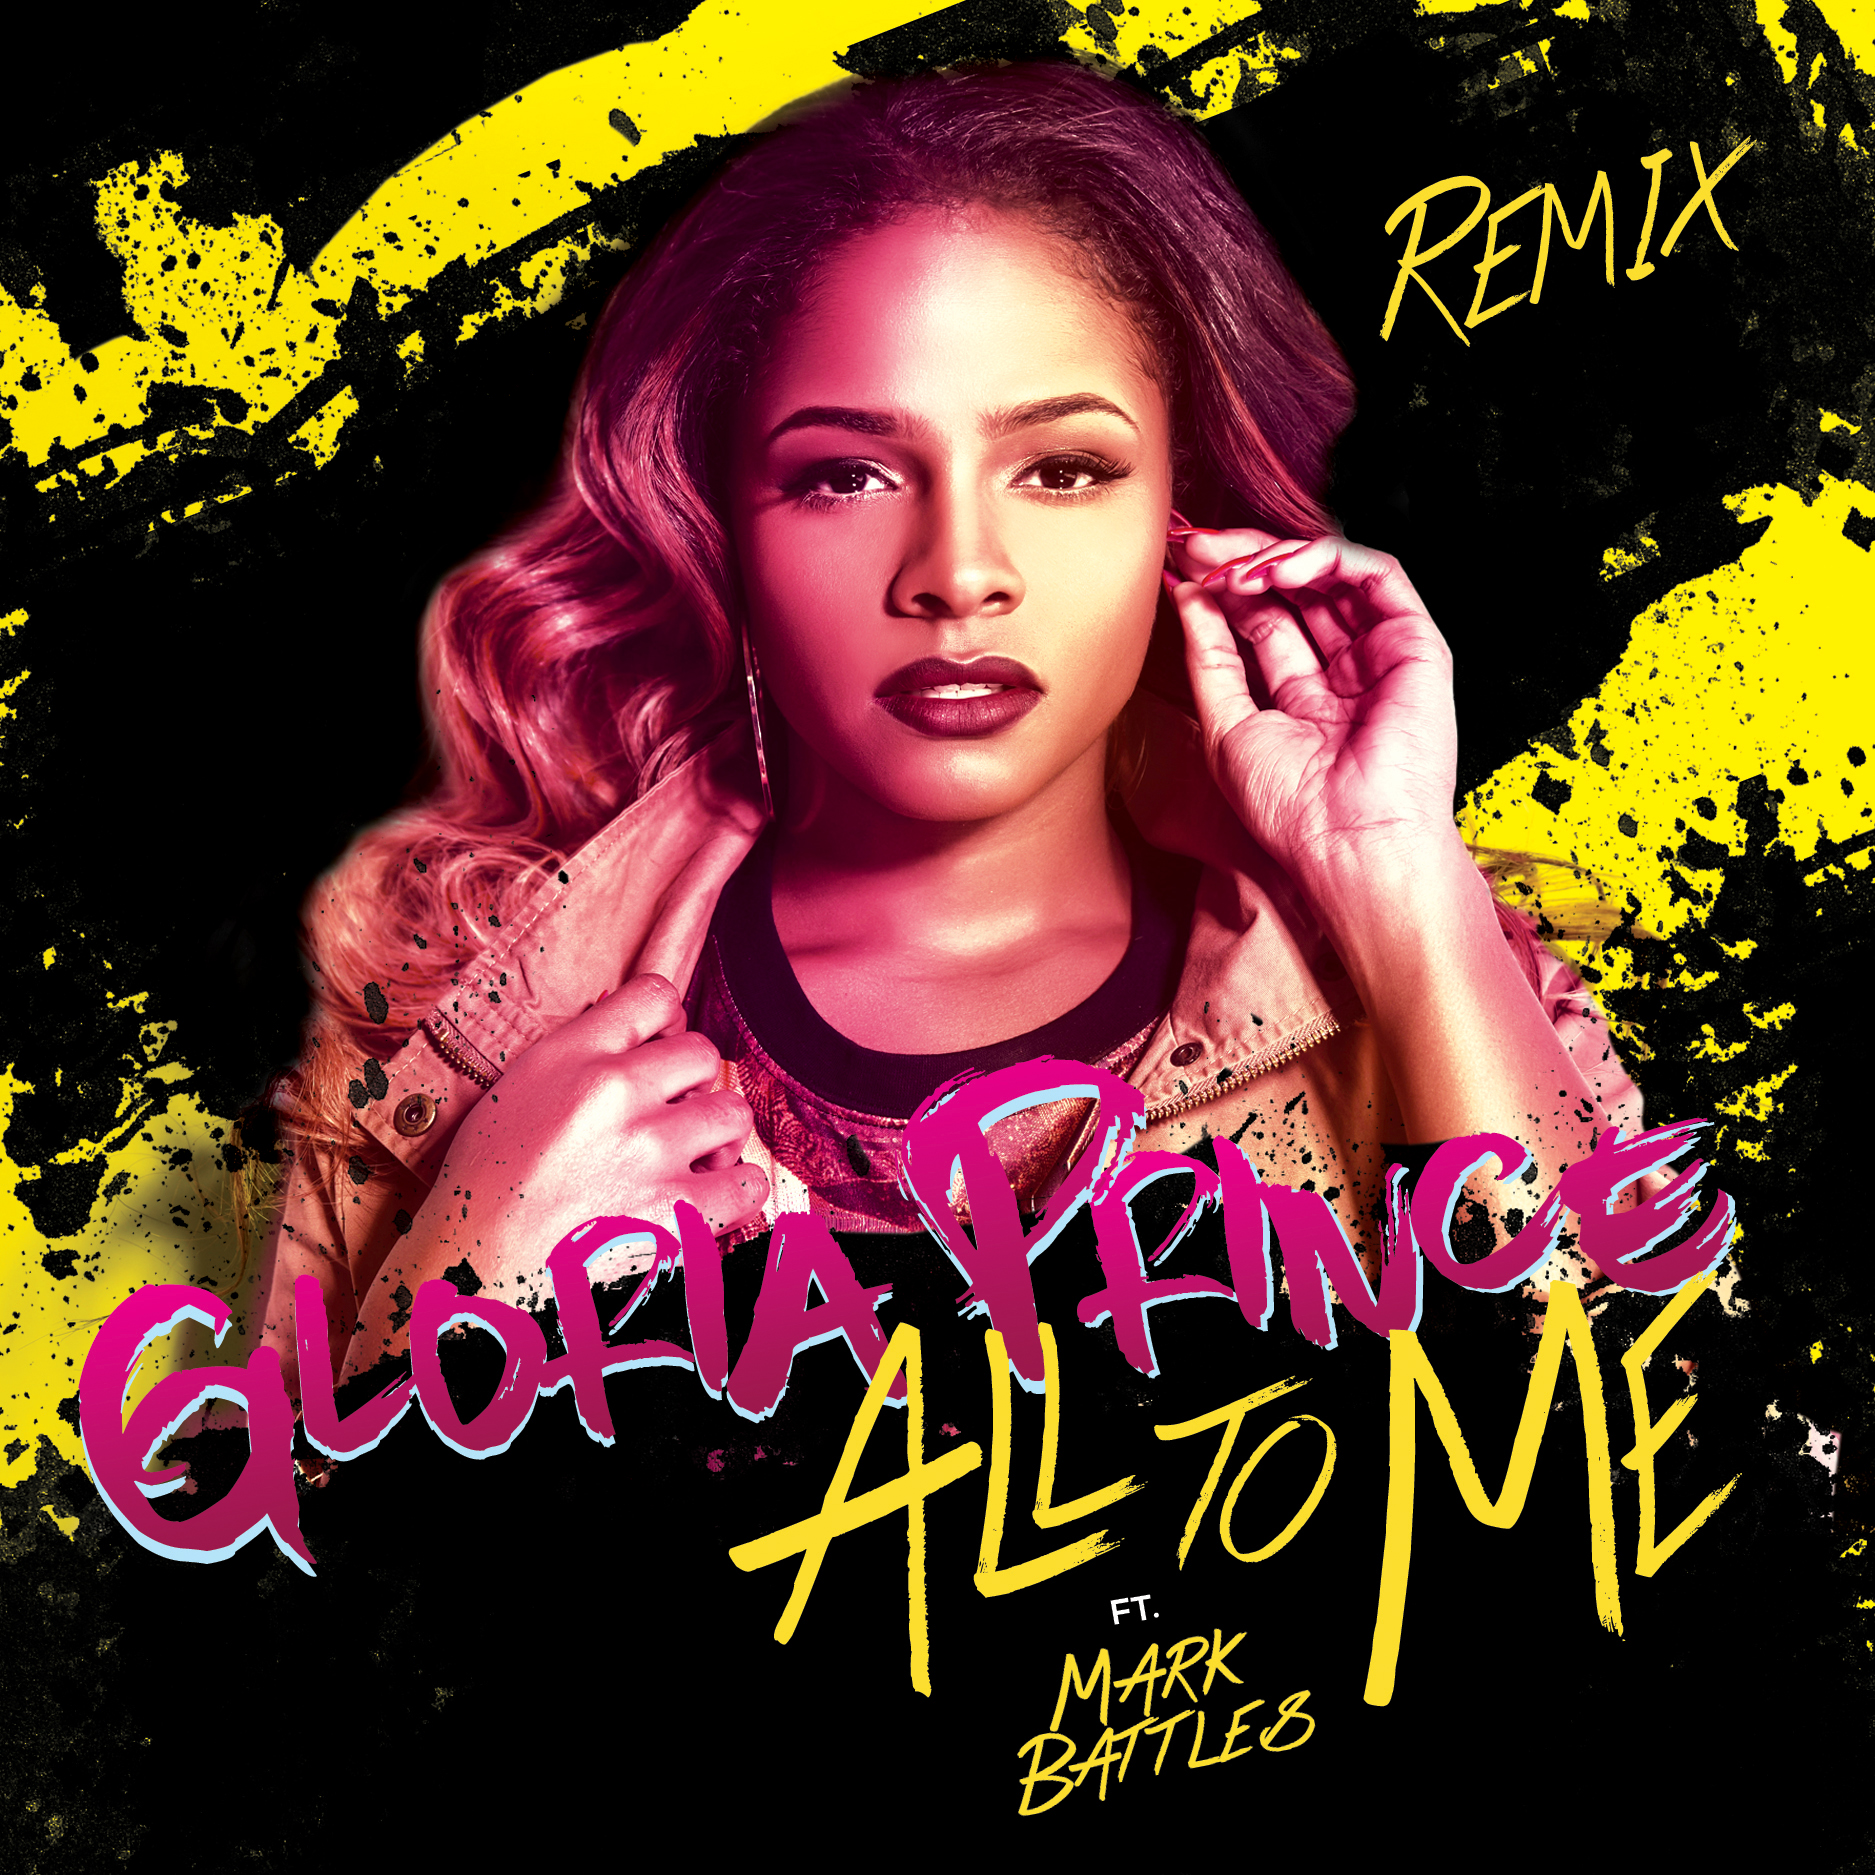 Texas Native Gloria Prince Releases “All To Me” Featuring Mark Battles